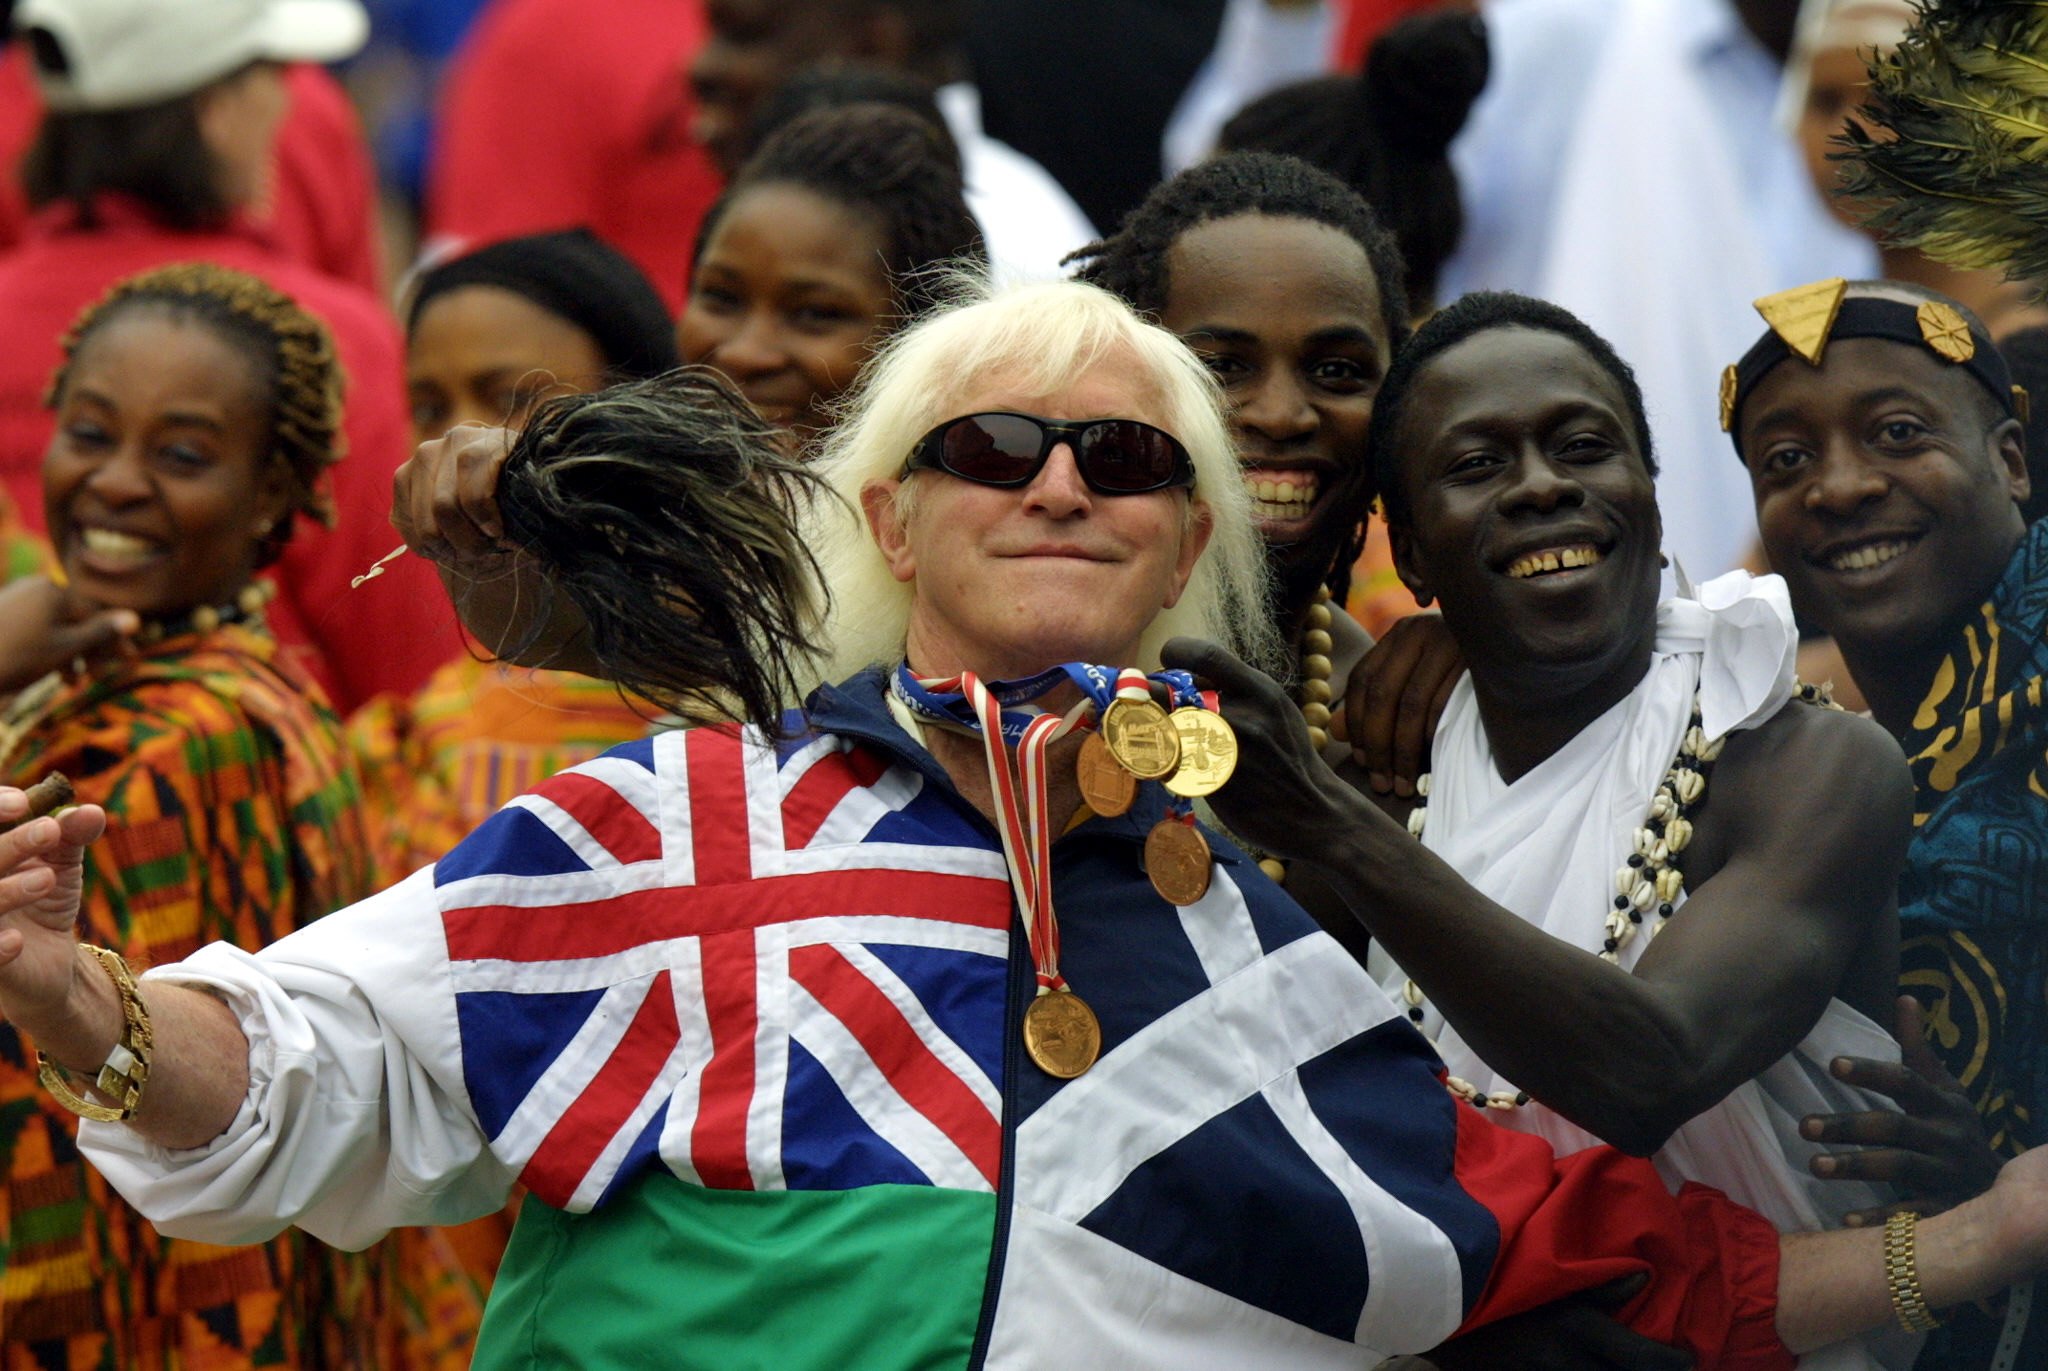 Jimmy Savile, pictured in 2004, is now the subject of more than 200 allegations of sex abuse. Photo: AFP